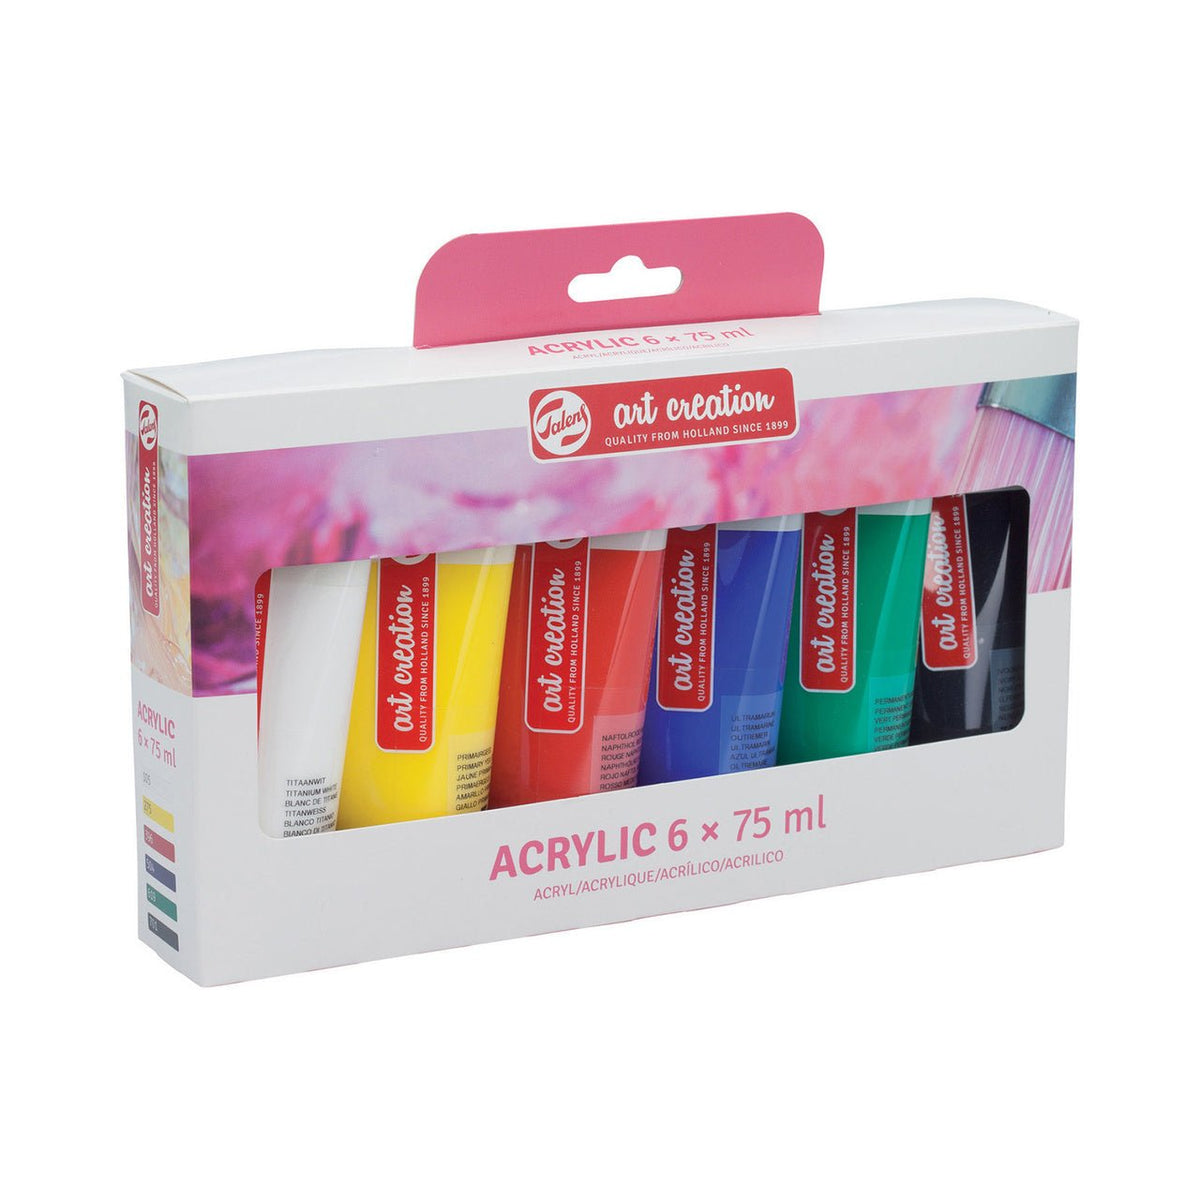 Talens Art Creation Acrylic Set of 6 Colors in 75ml Tubes - merriartist.com